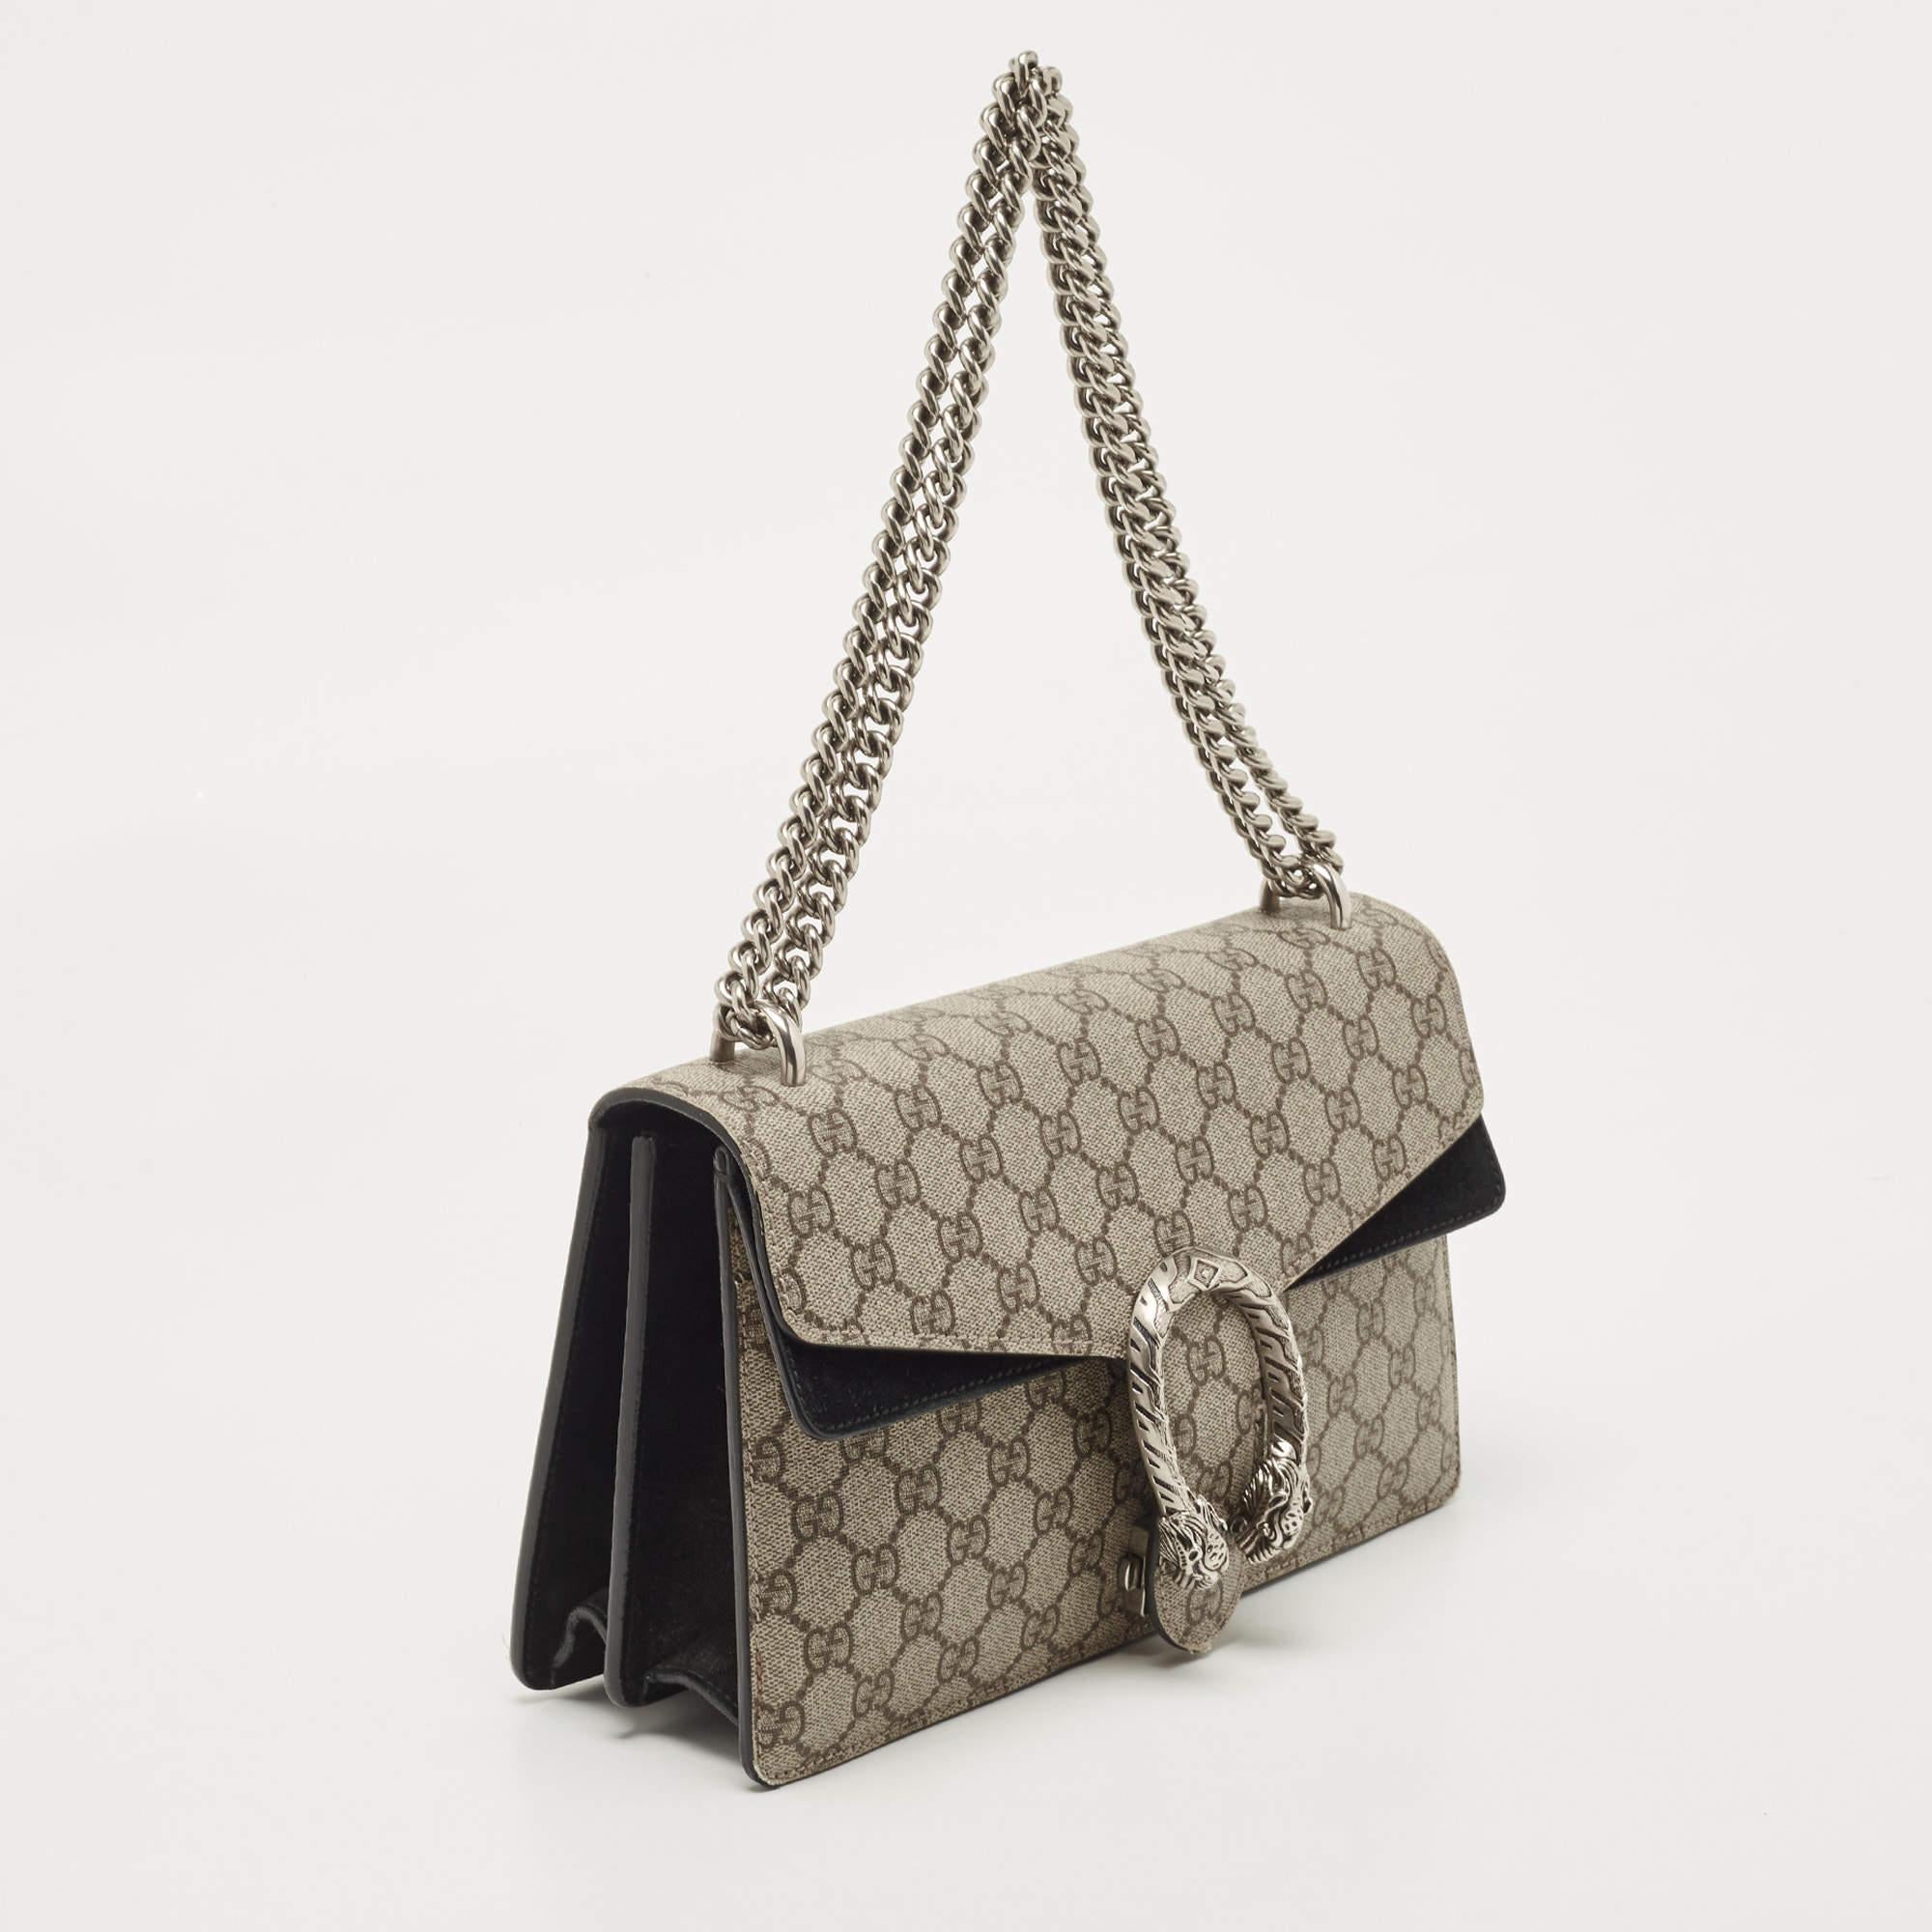 Women's Gucci Beige GG Supreme Canvas and Suede Small Dionysus Shoulder Bag